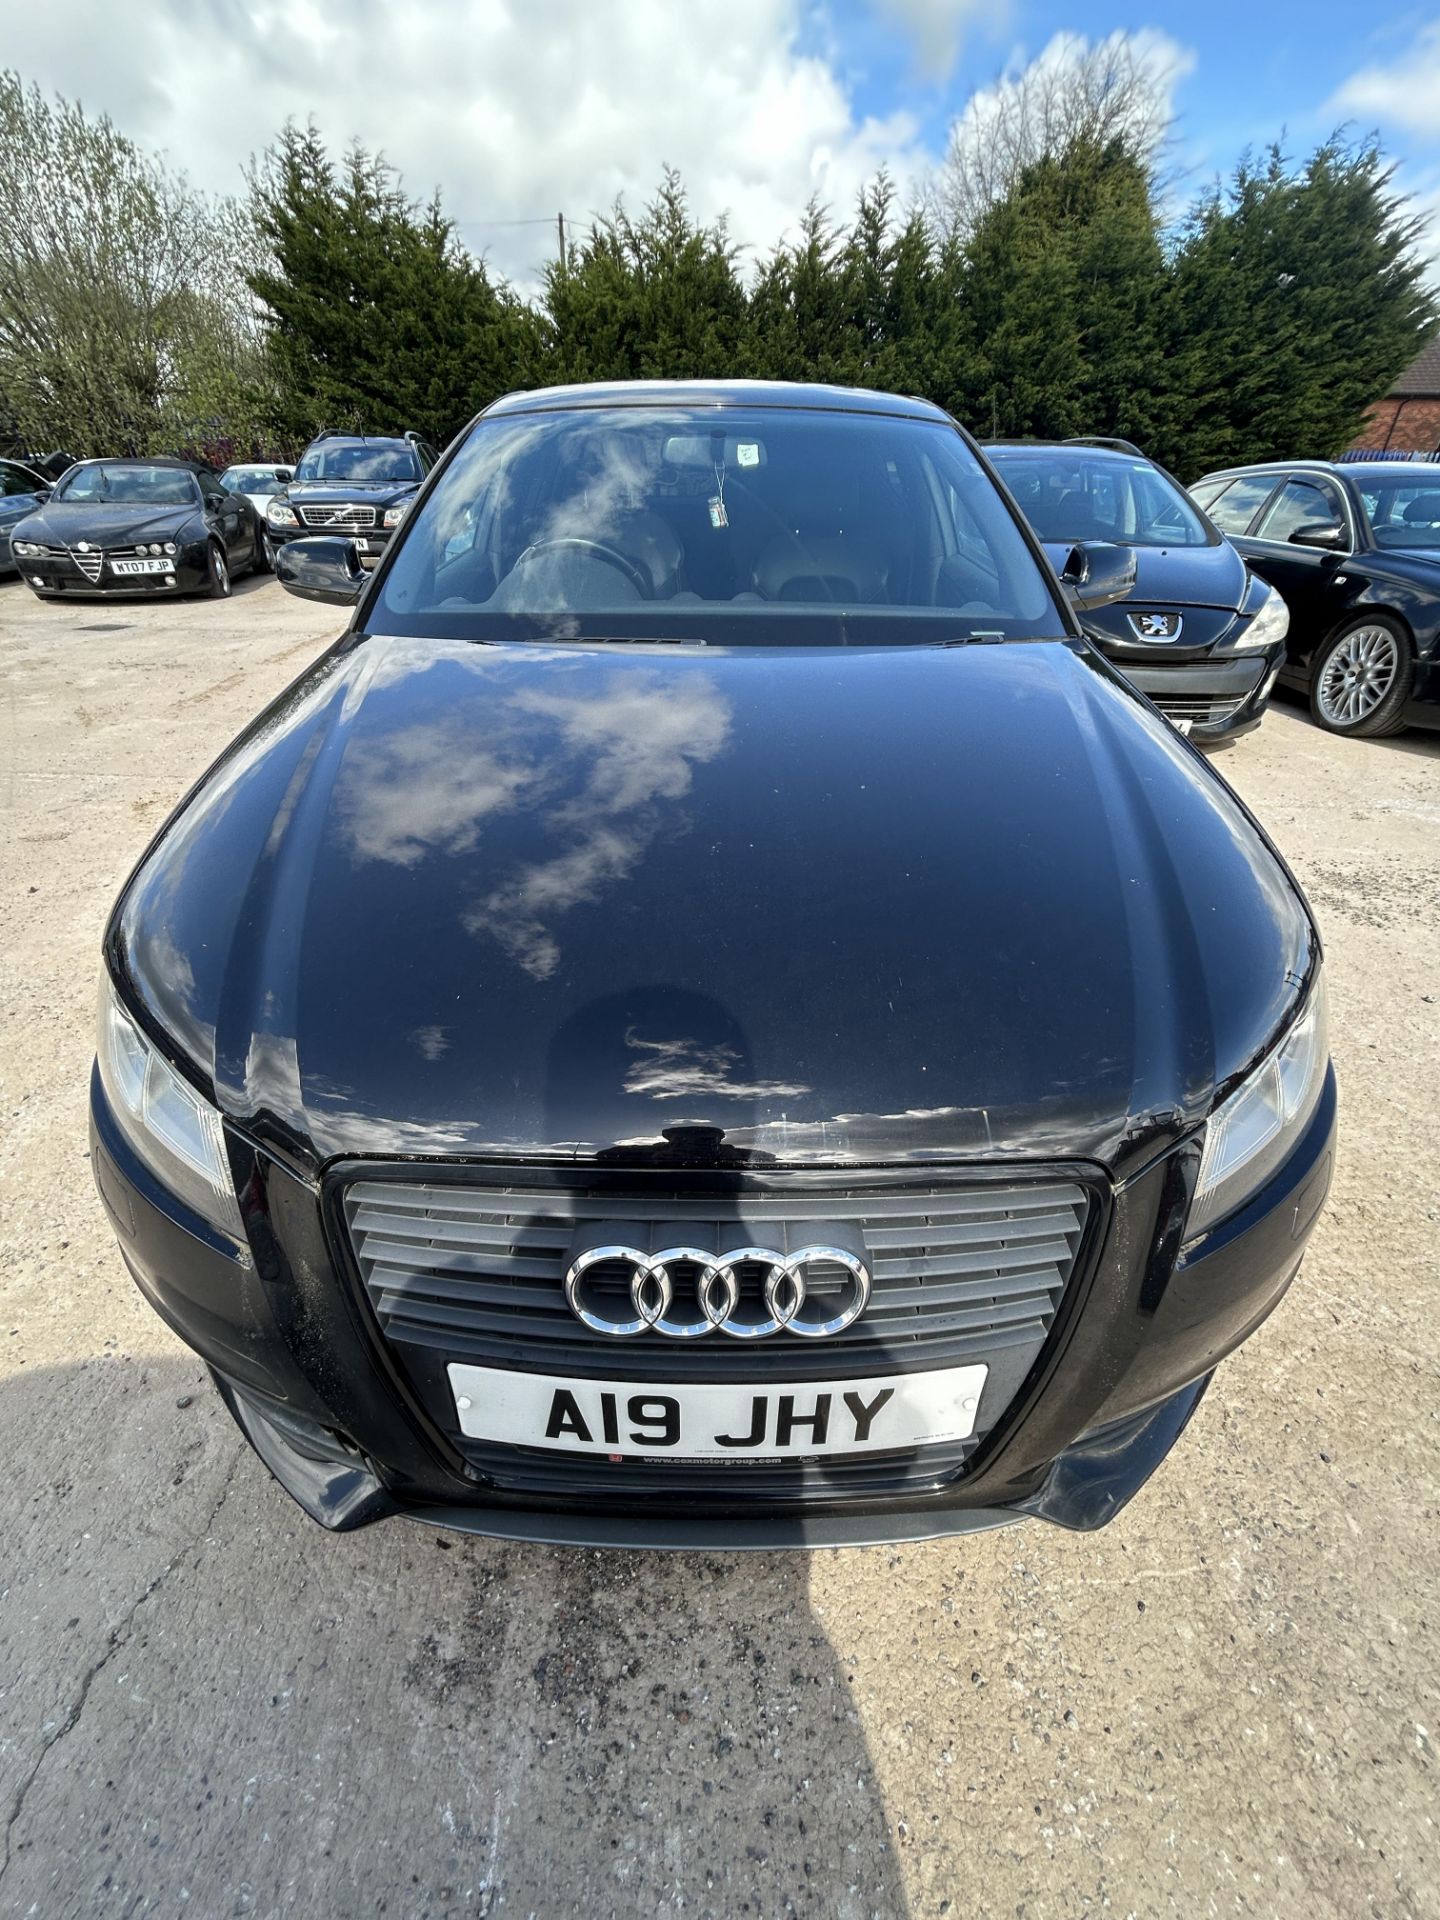 Audi A3 S Line SP TDI 138 Diesel 5 Door Hatchback | GY61 AOU | Mileage: TBC - Image 2 of 11